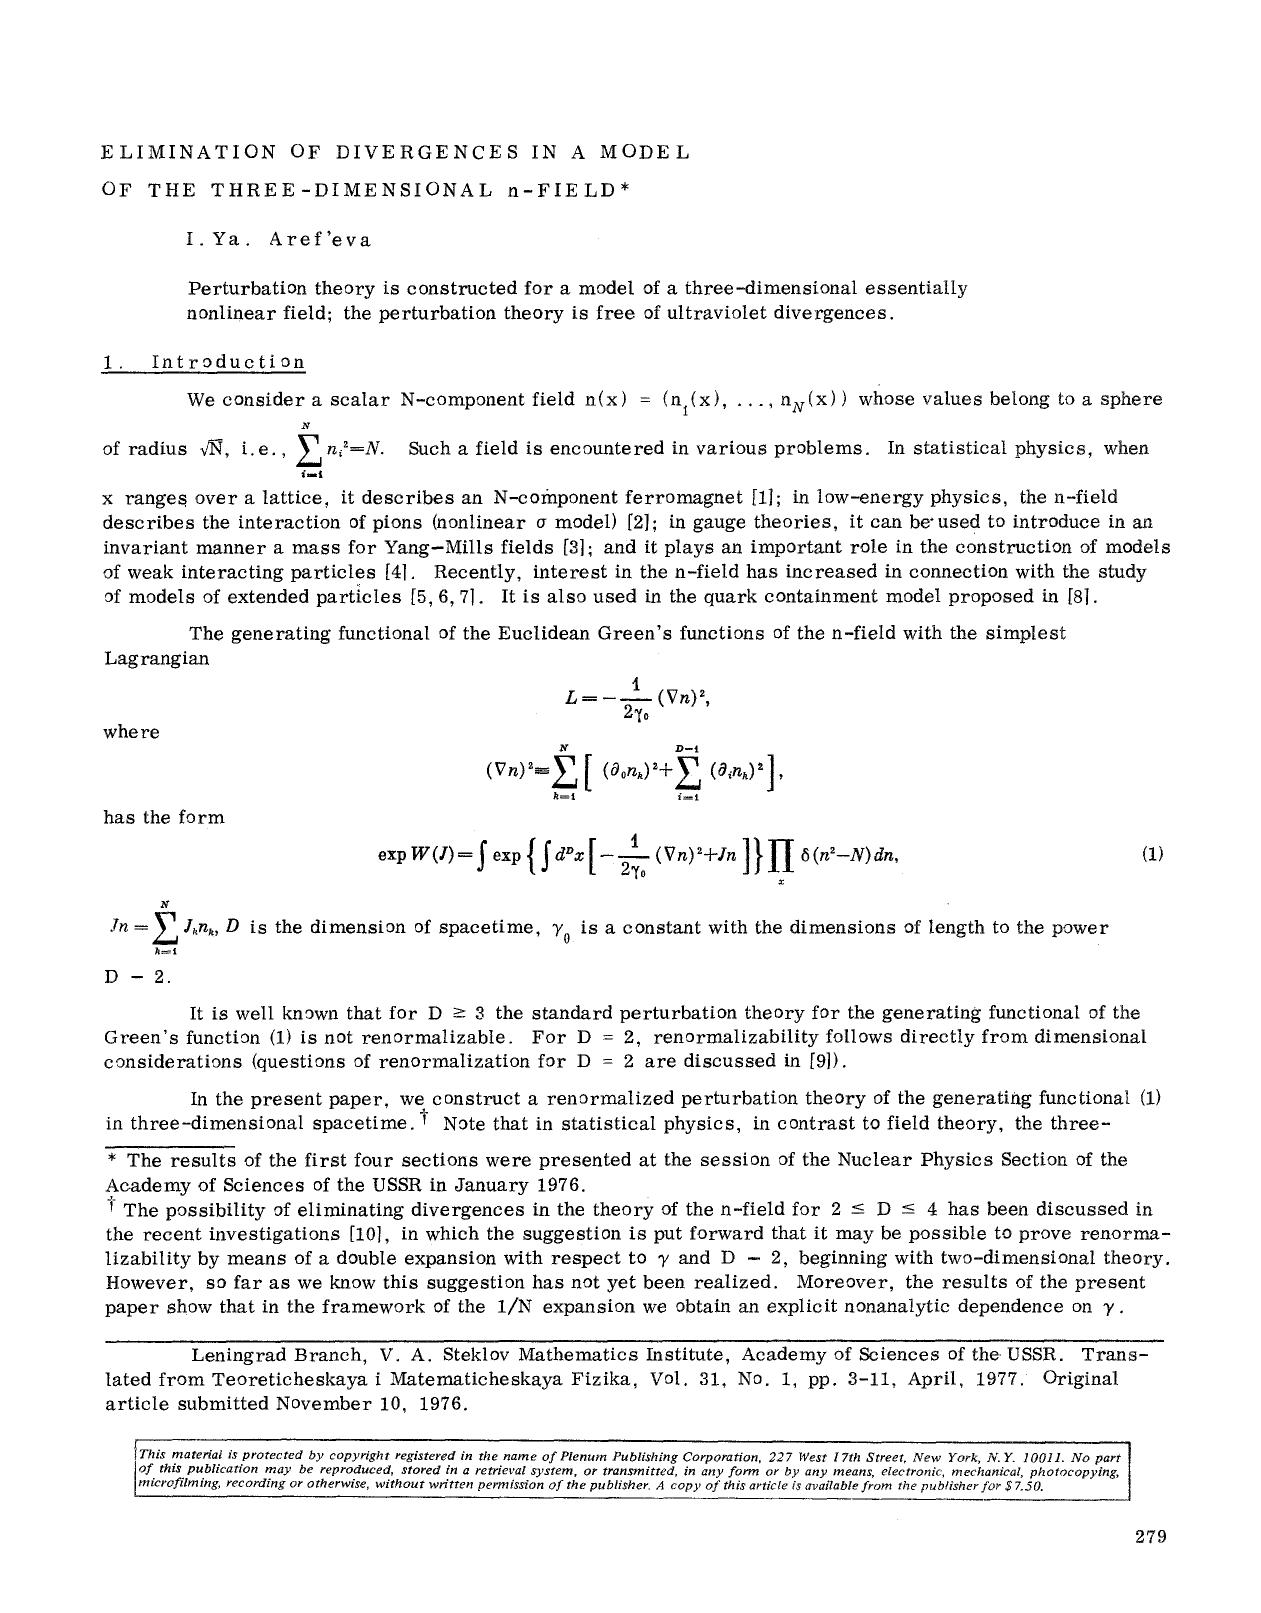 Elimination of divergences in a model of the three-dimensional n-field by Unknown